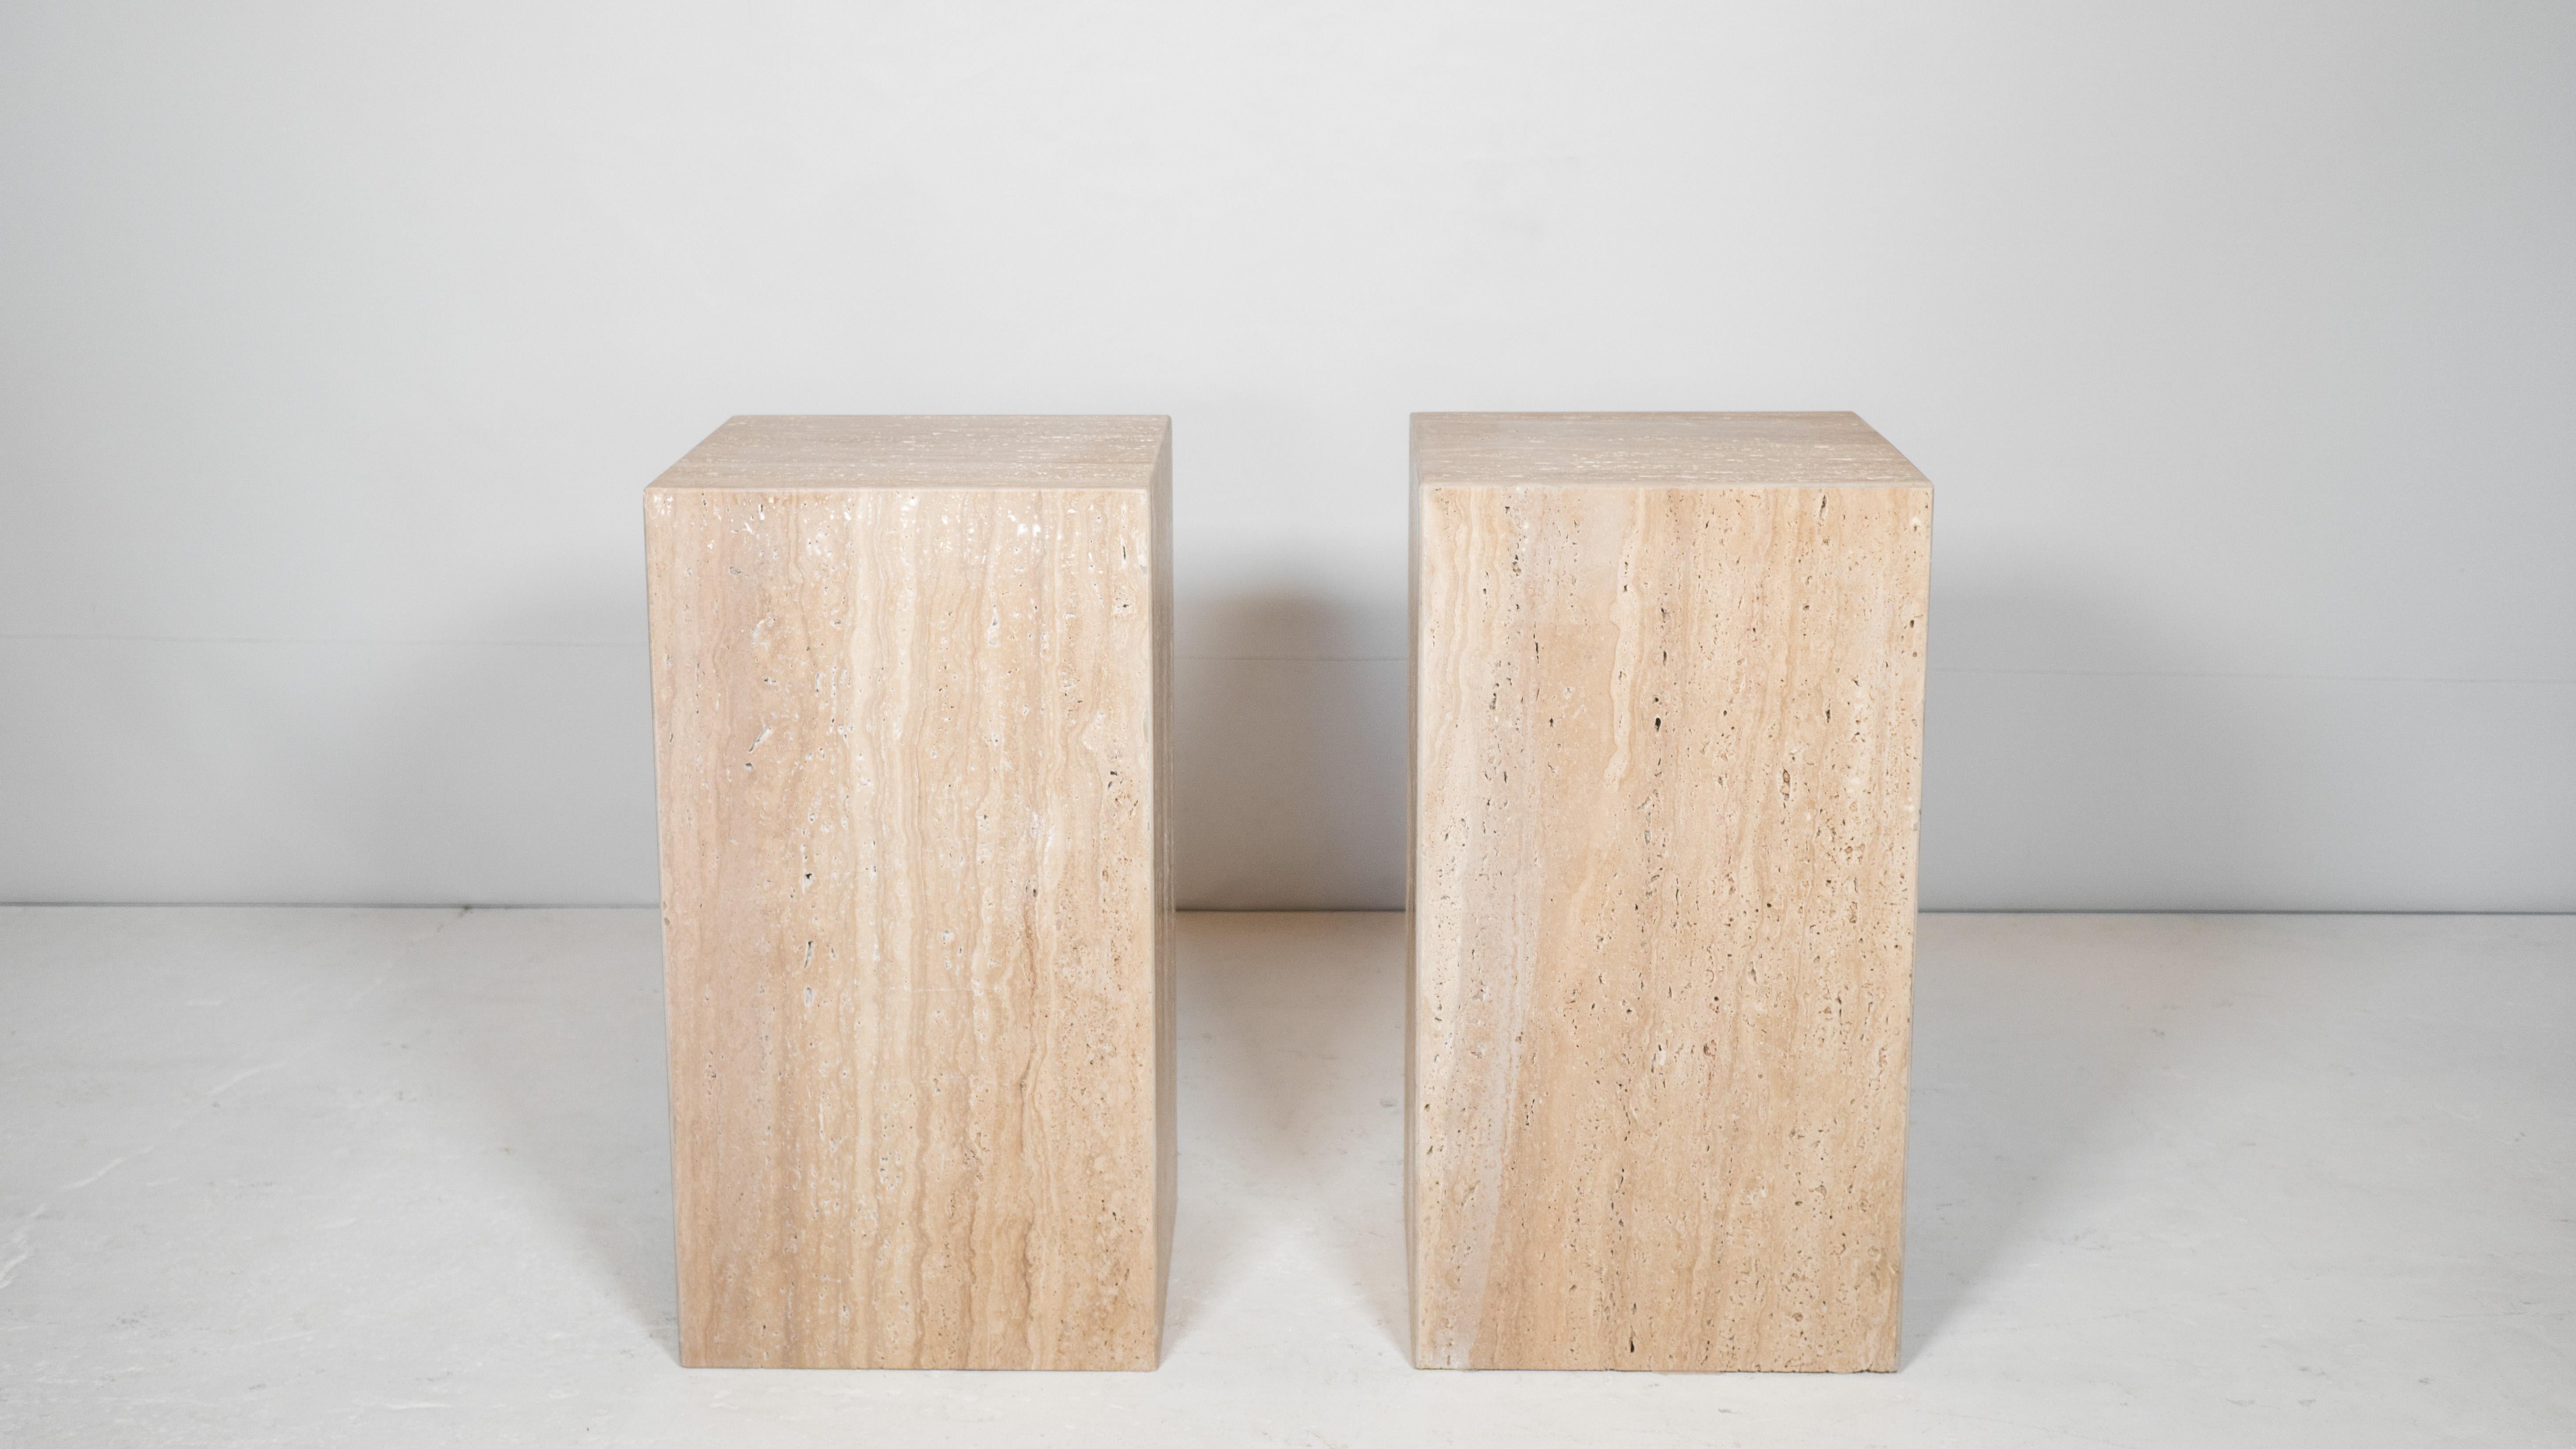 Impressive pair of large Italian travertine side tables, circa 1980s. Beautiful grain seen throughout the porous raw stone with vibrant neutral earth tones and hues. Presence offer elegance while maintaining minimalist design. Rectangle cuboid shape